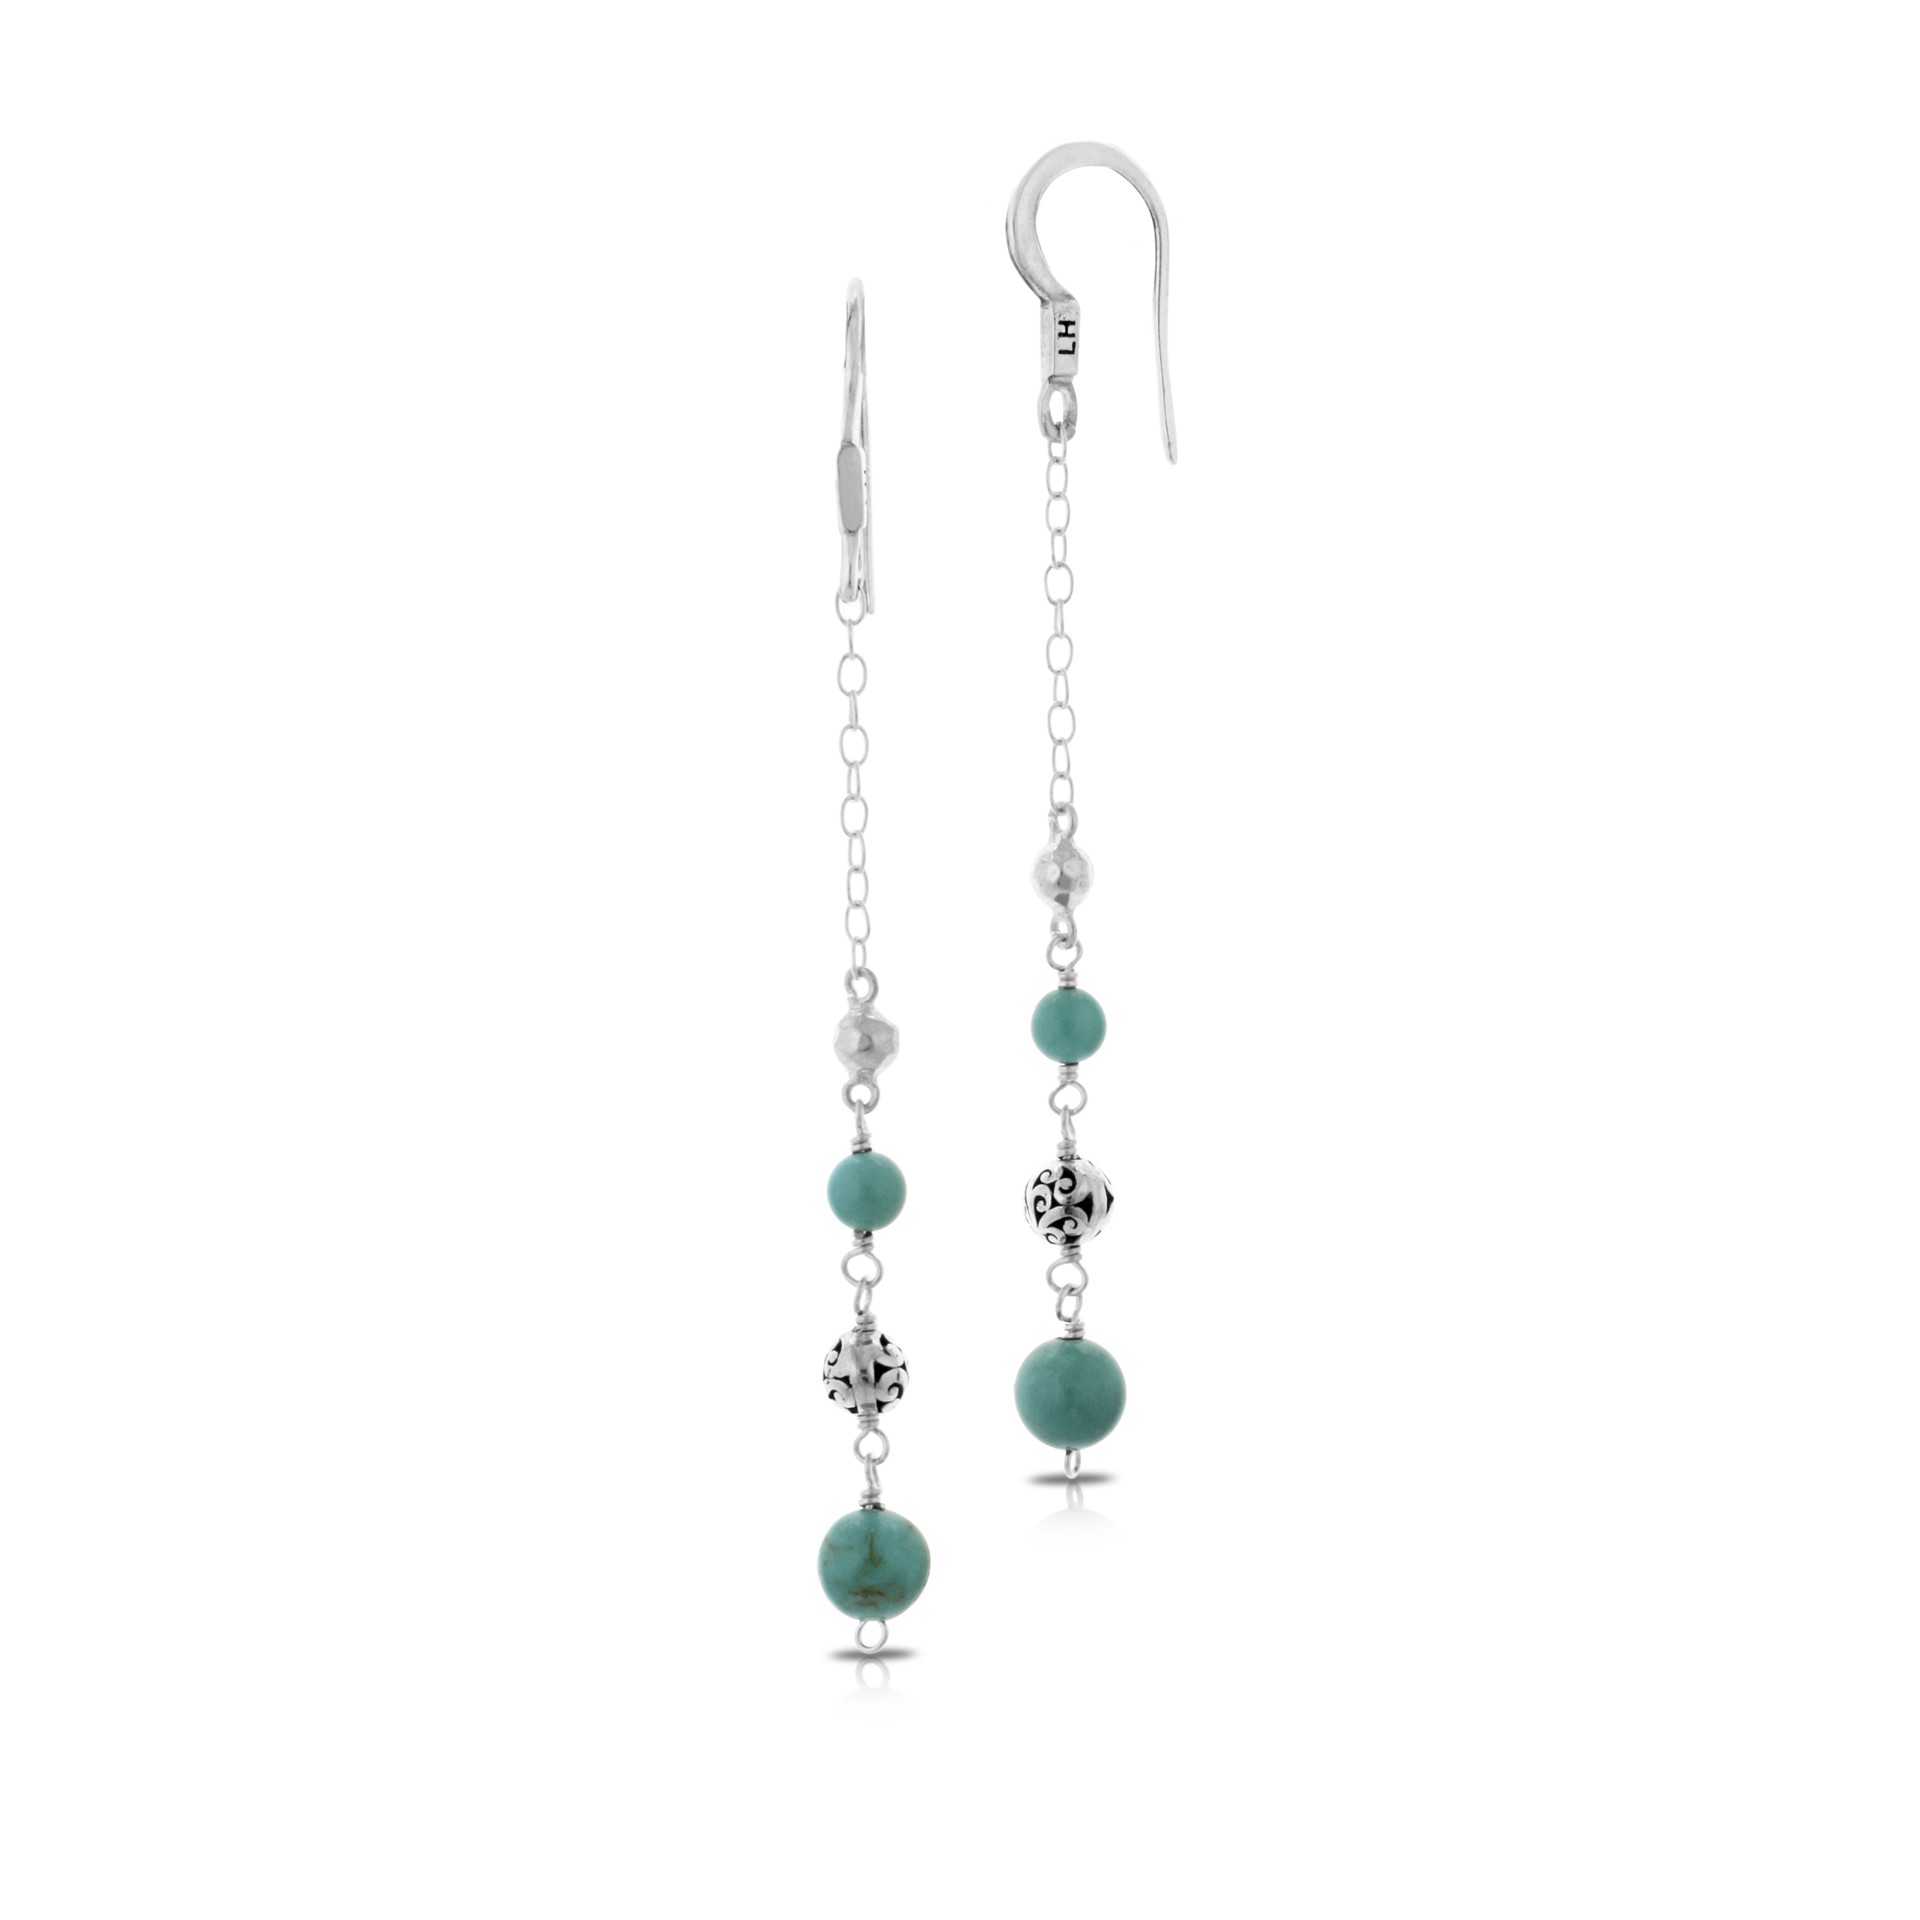 Blue Turquoise and Scroll Beads Simple Linear Drop Earrings with Chain by Lois Hill